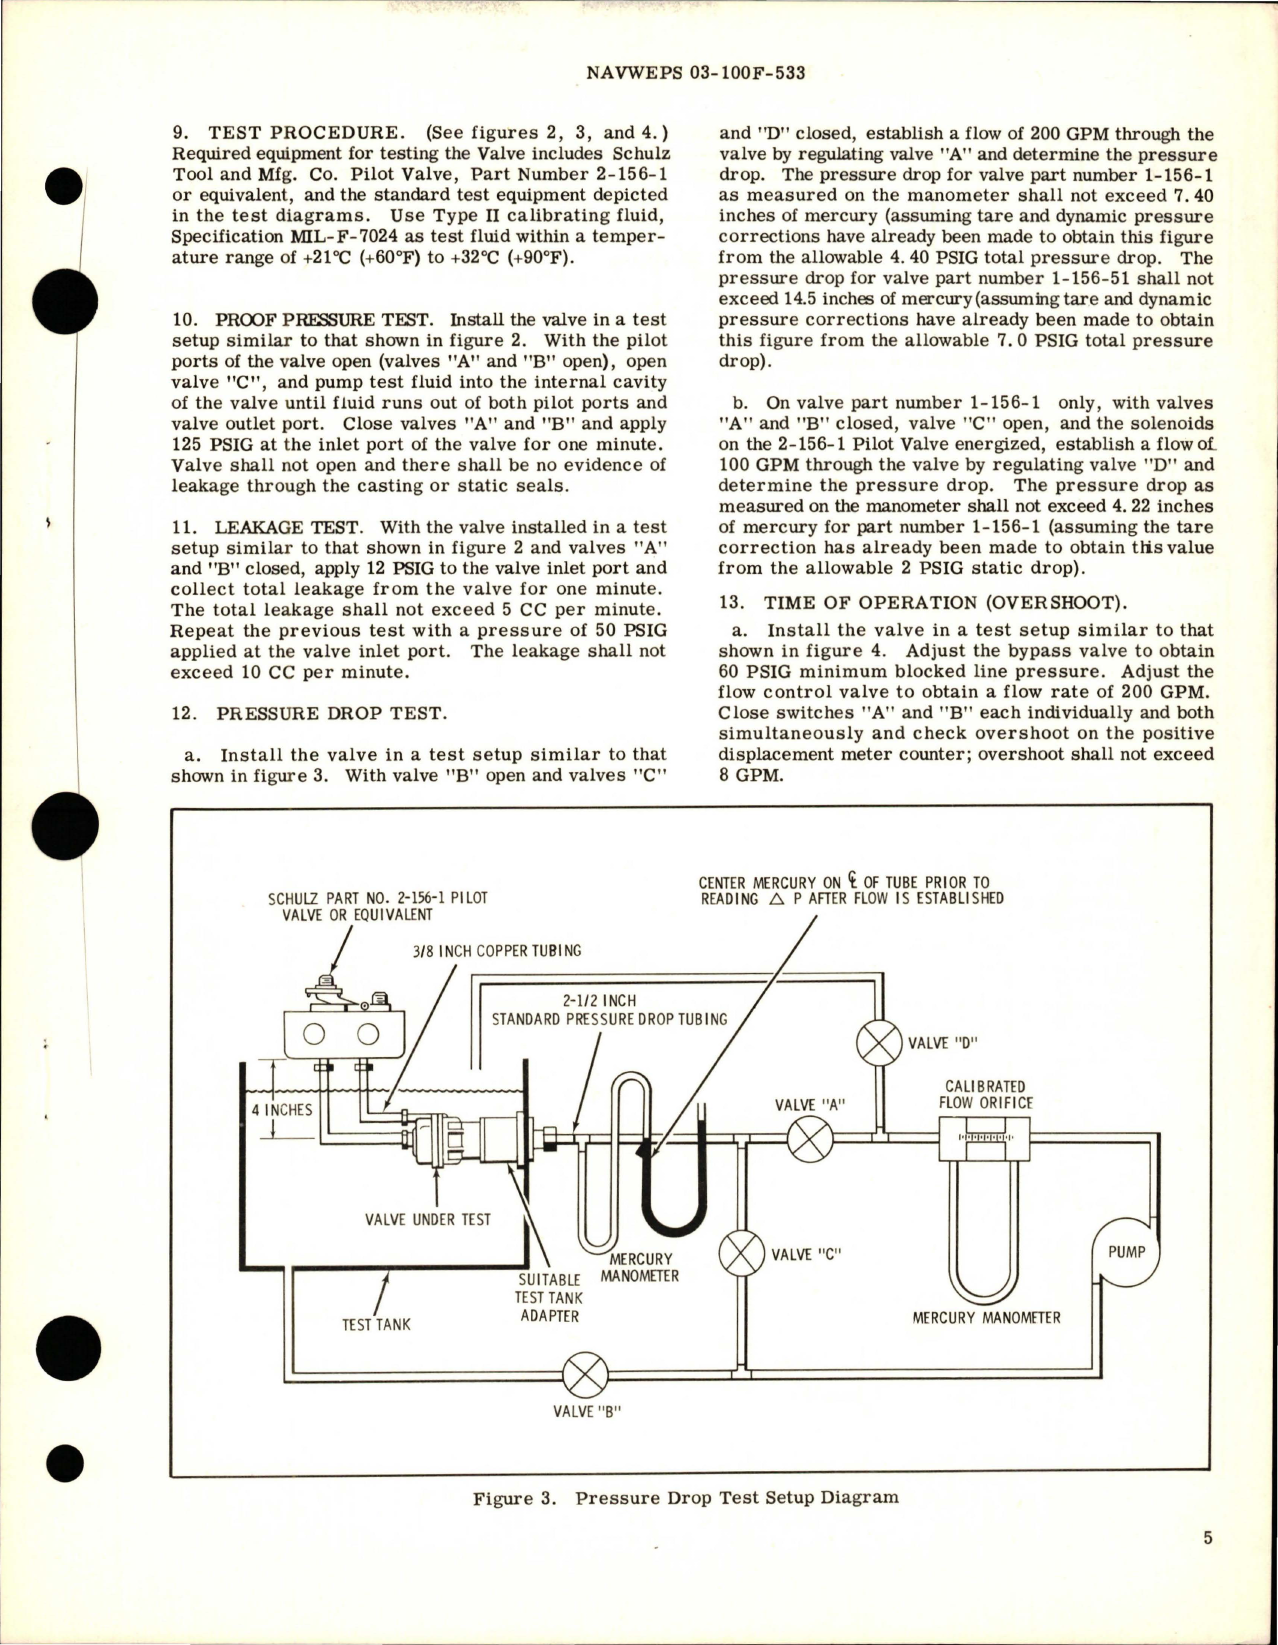 Sample page 5 from AirCorps Library document: Overhaul Instructions with Parts Breakdown for Pressure Fueling Shutoff Valves - Parts 1-156-1 and 1-156-51 